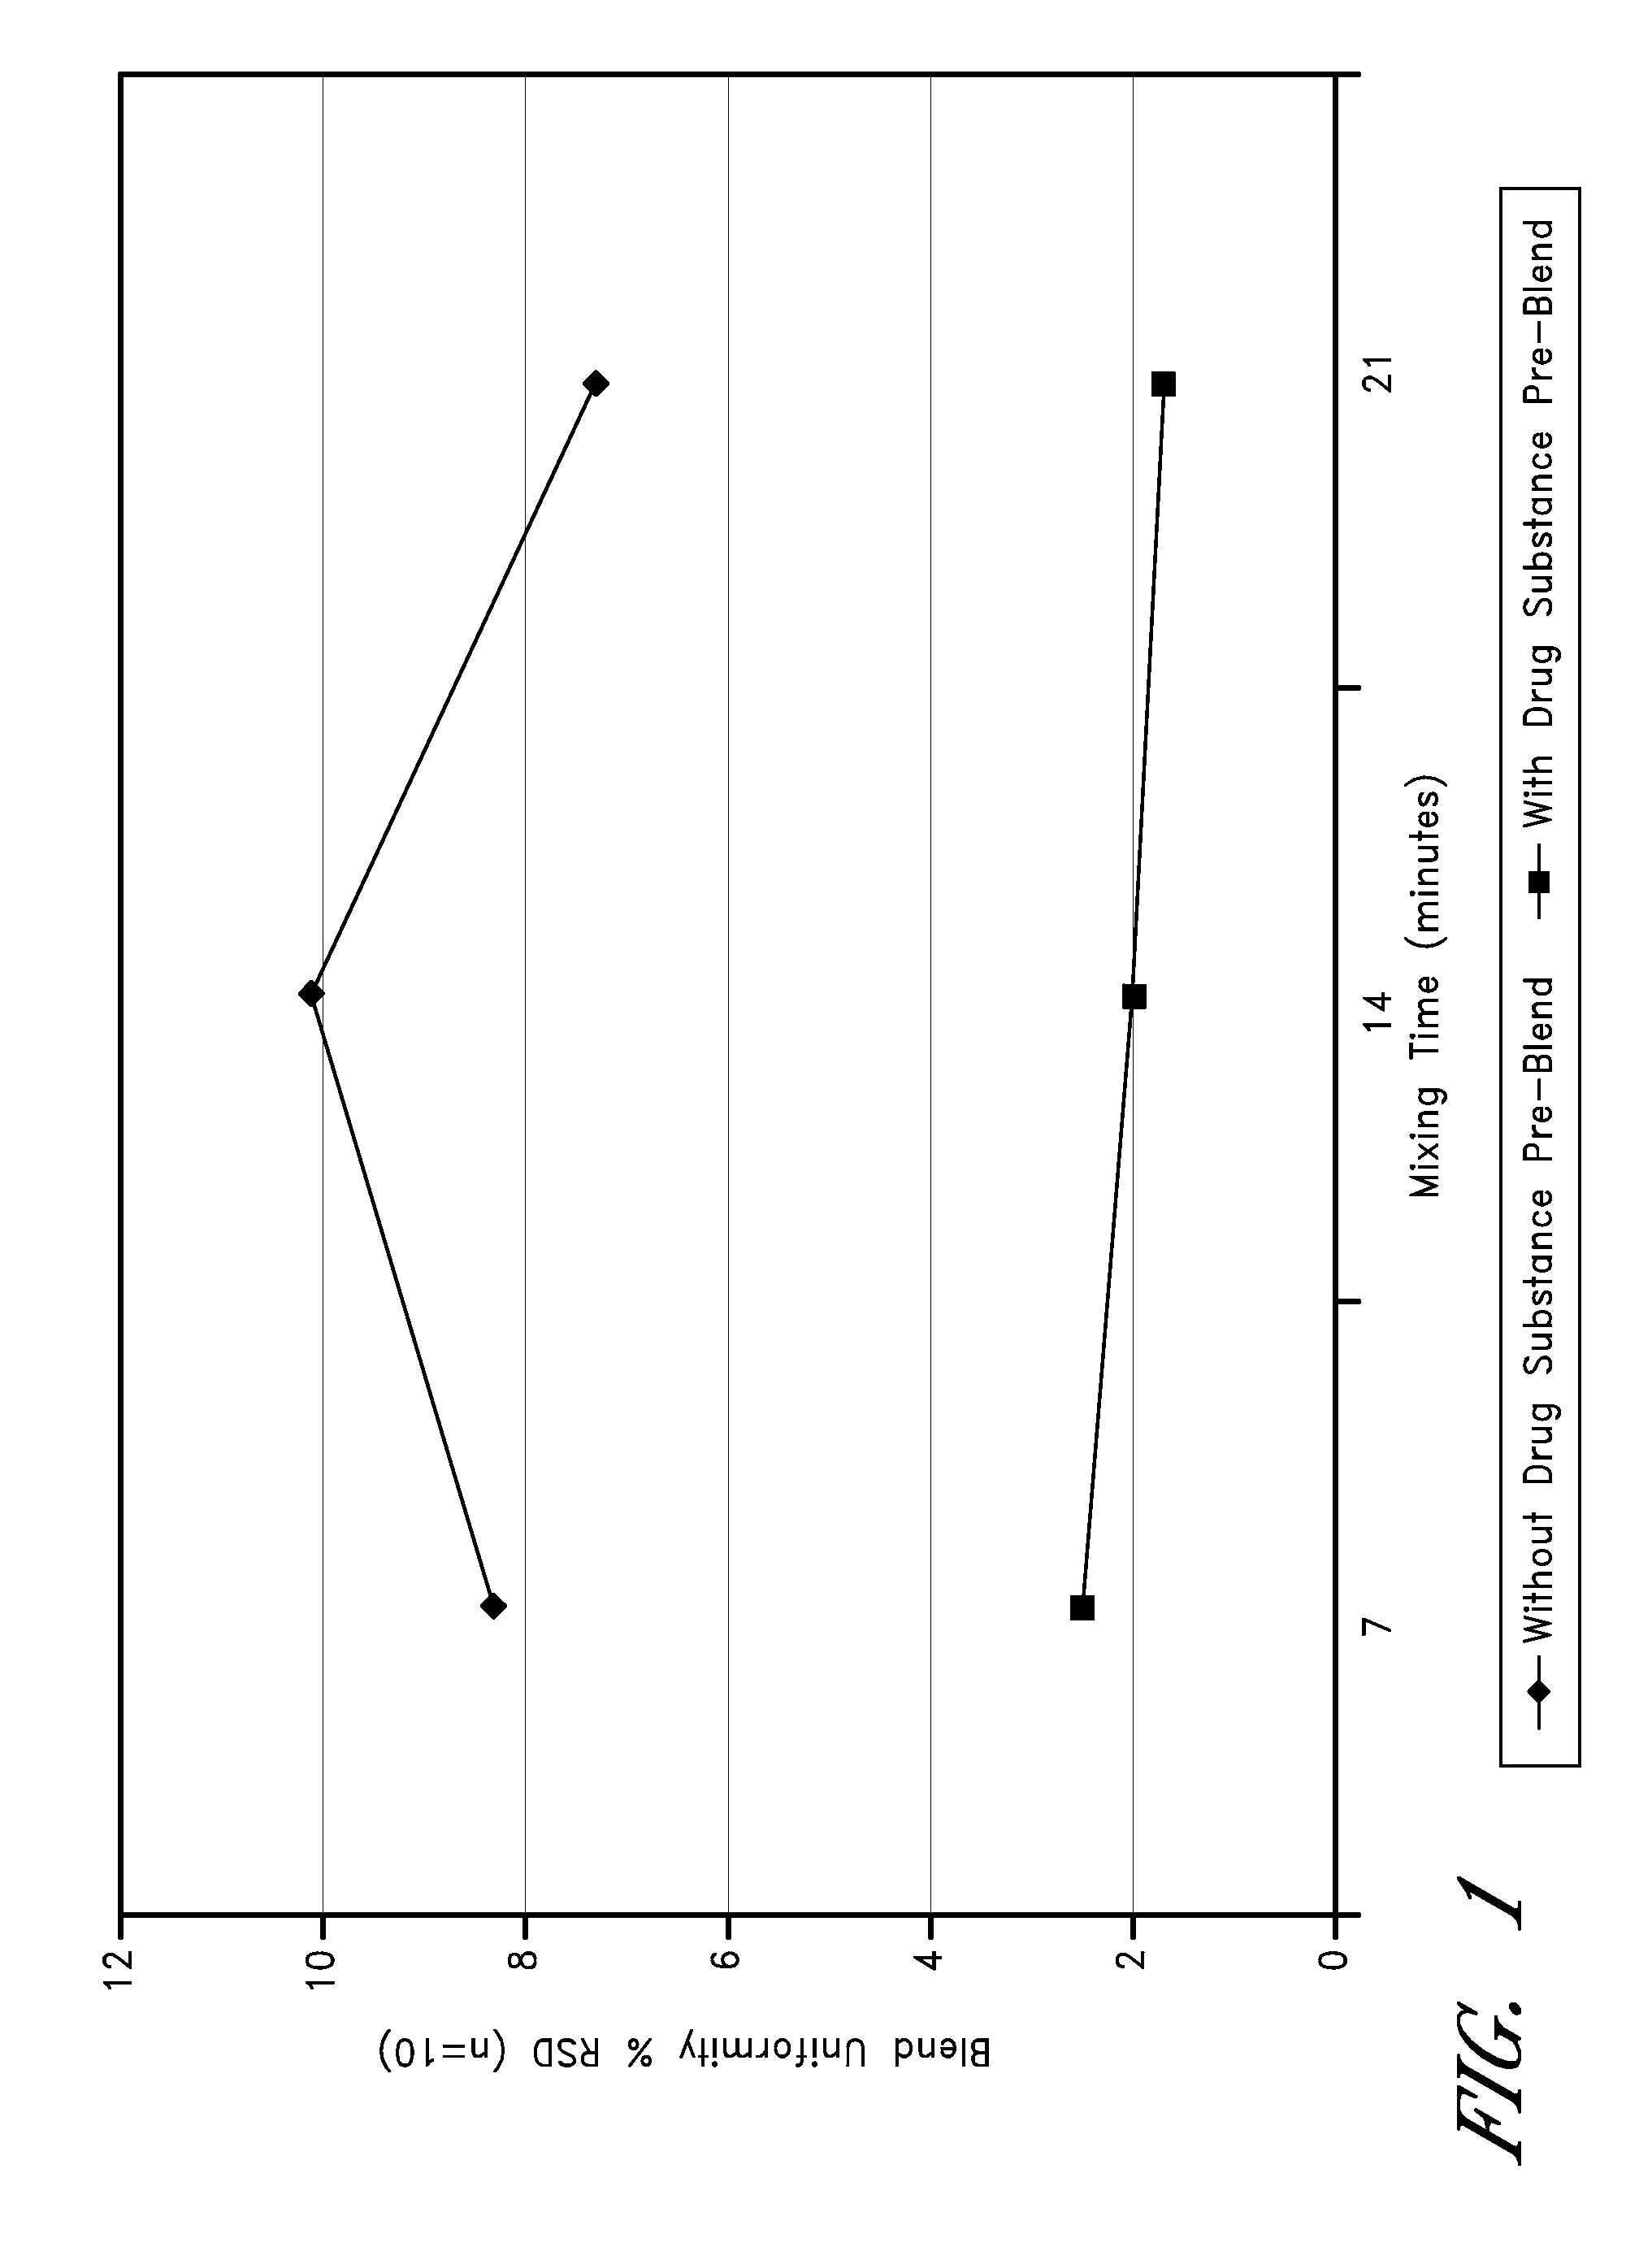 Low-dose doxepin formulations and methods of making and using the same